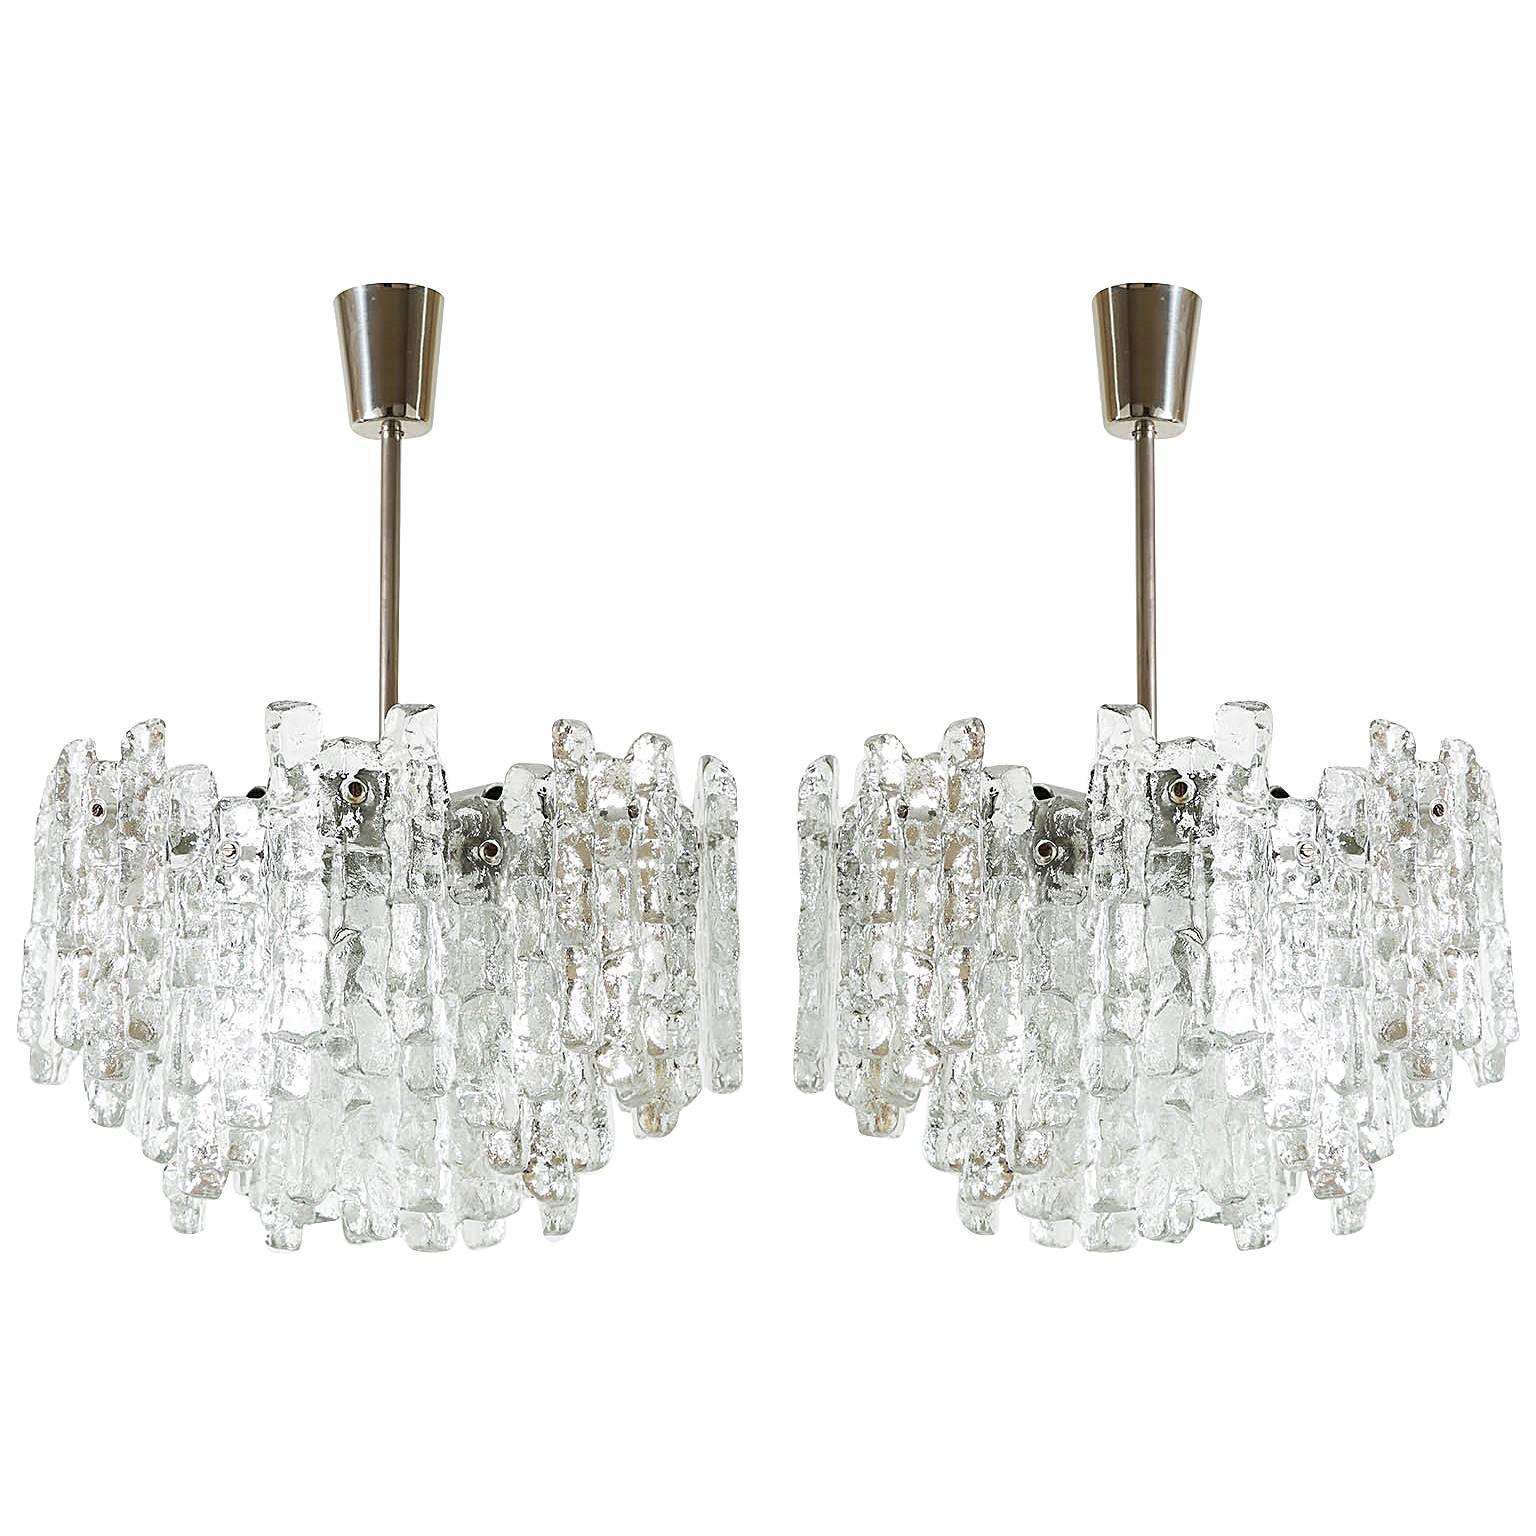 One of two beautiful ice glass light fixtures by Kalmar, Austria, manufactured in midcentury, circa 1970 (late 1960s or early 1970s). 
The price is per light. They are sold individually or as pair.
Each chandelier is made of 18 massive ice blocks